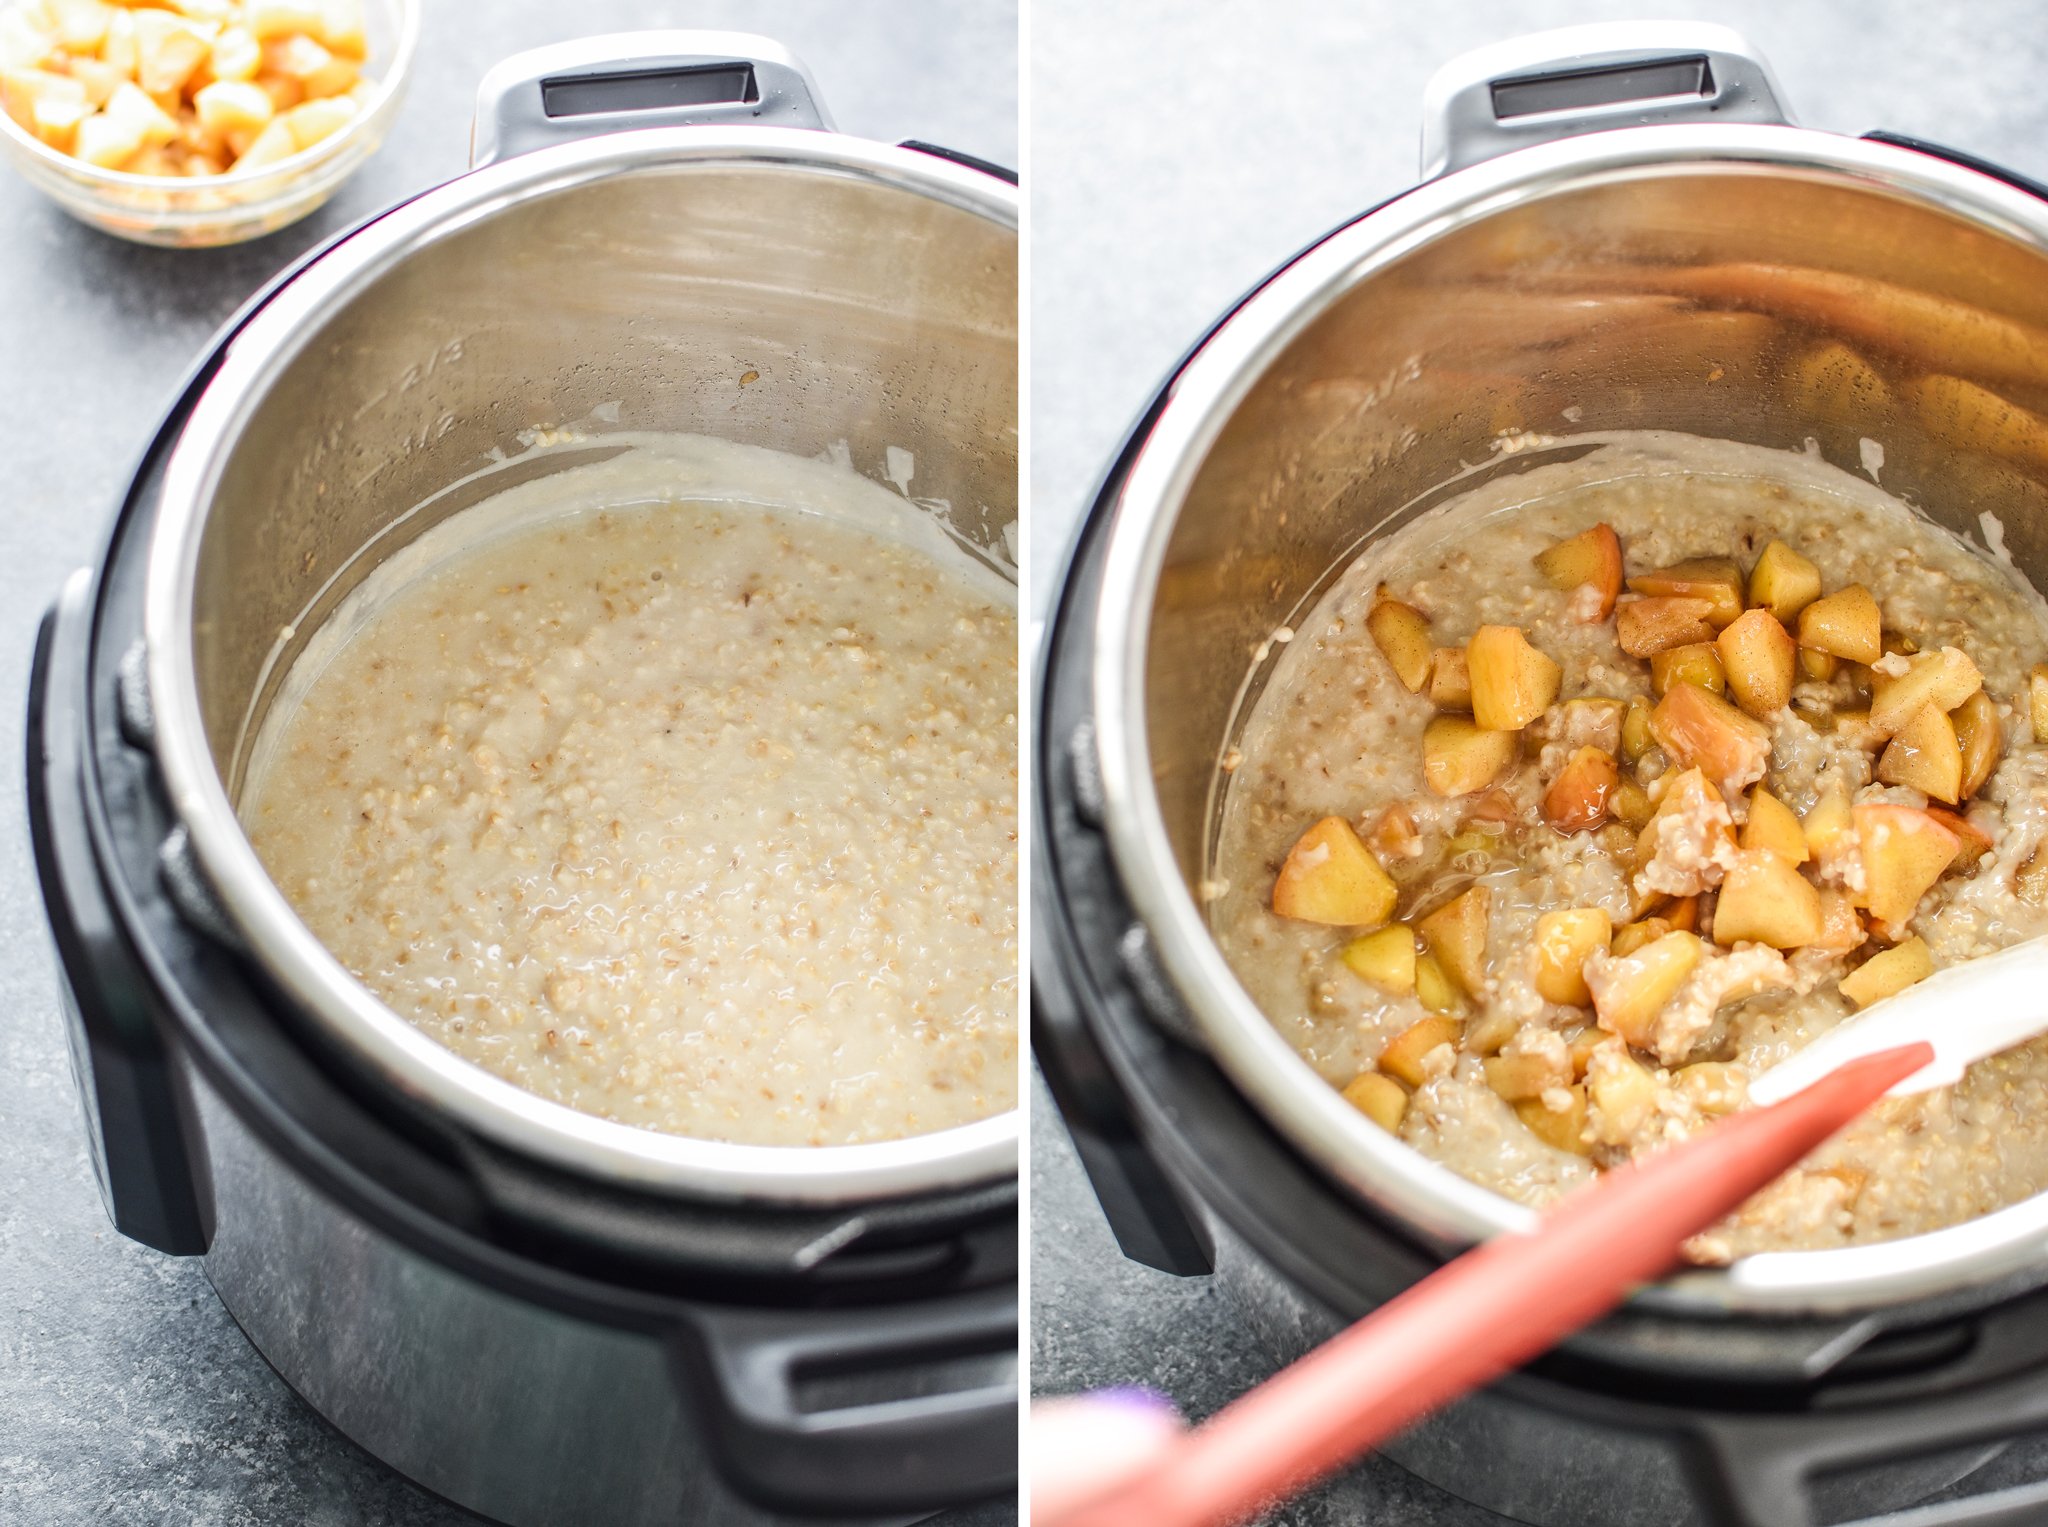 Left: Cooked oatmeal inside the instant pot. Right: Adding cooked apples to the Instant Pot oatmeal.